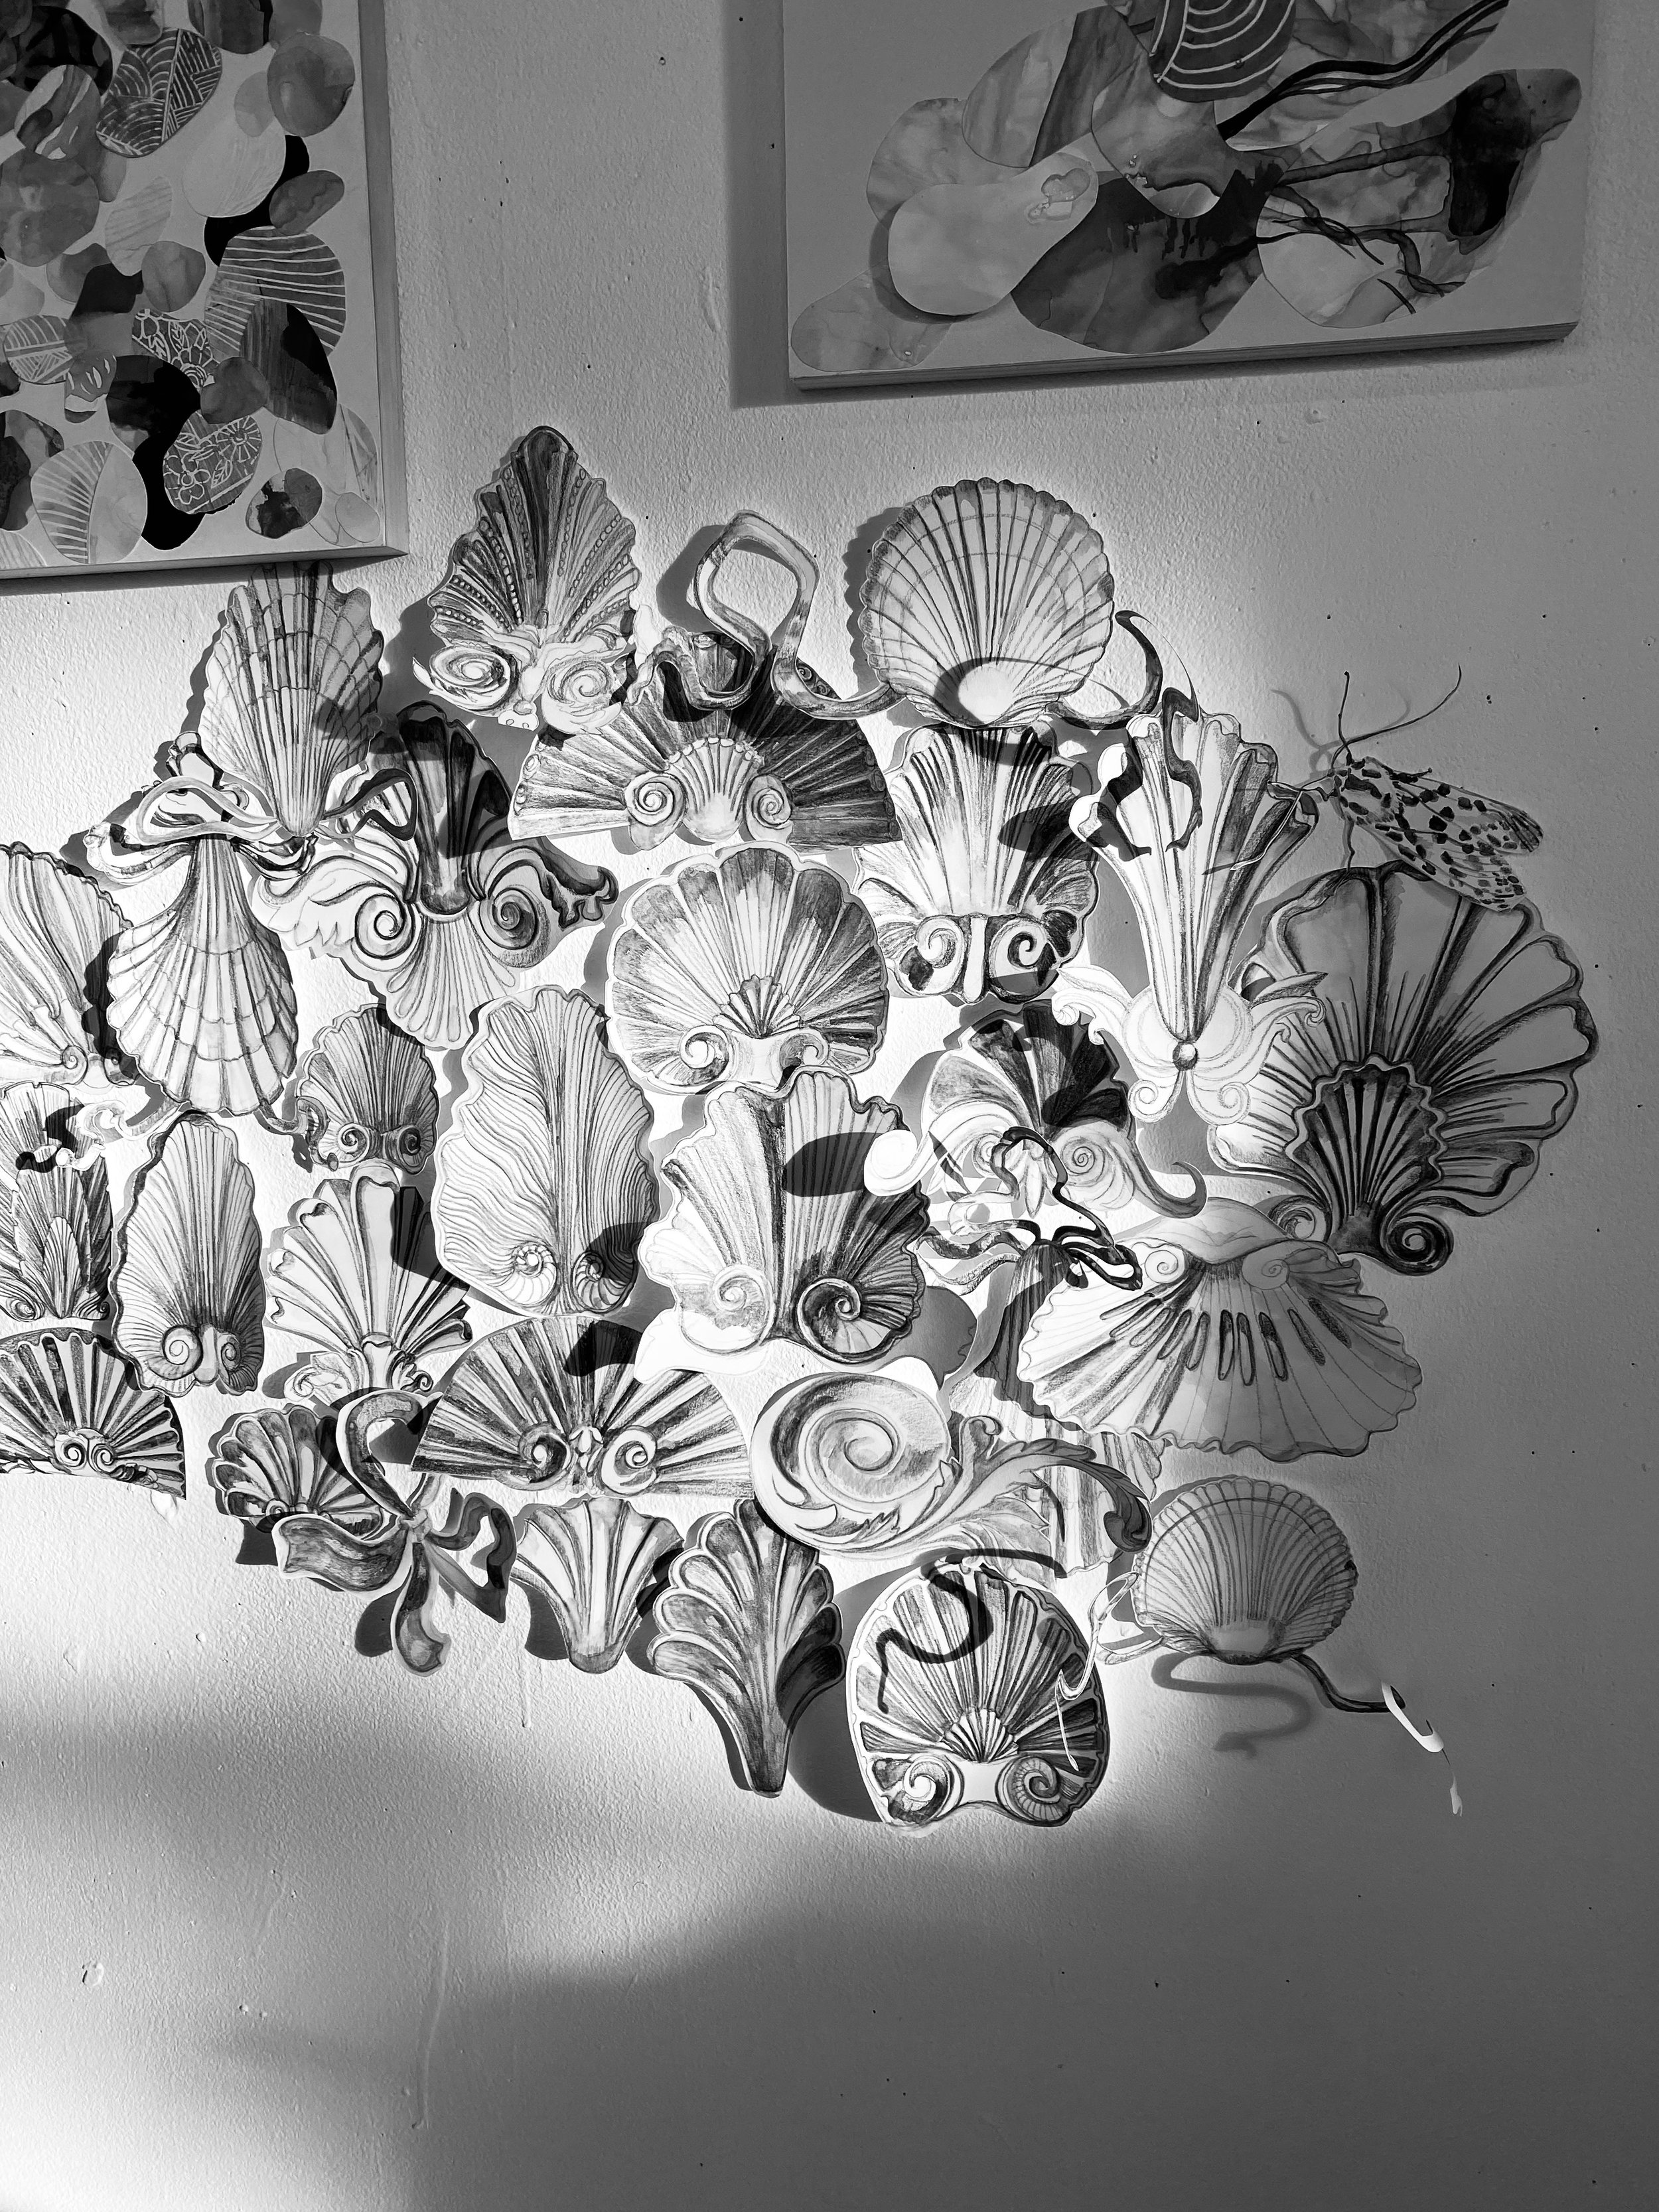 Installation of shell inspired drawings on the wall in a black and white photograph